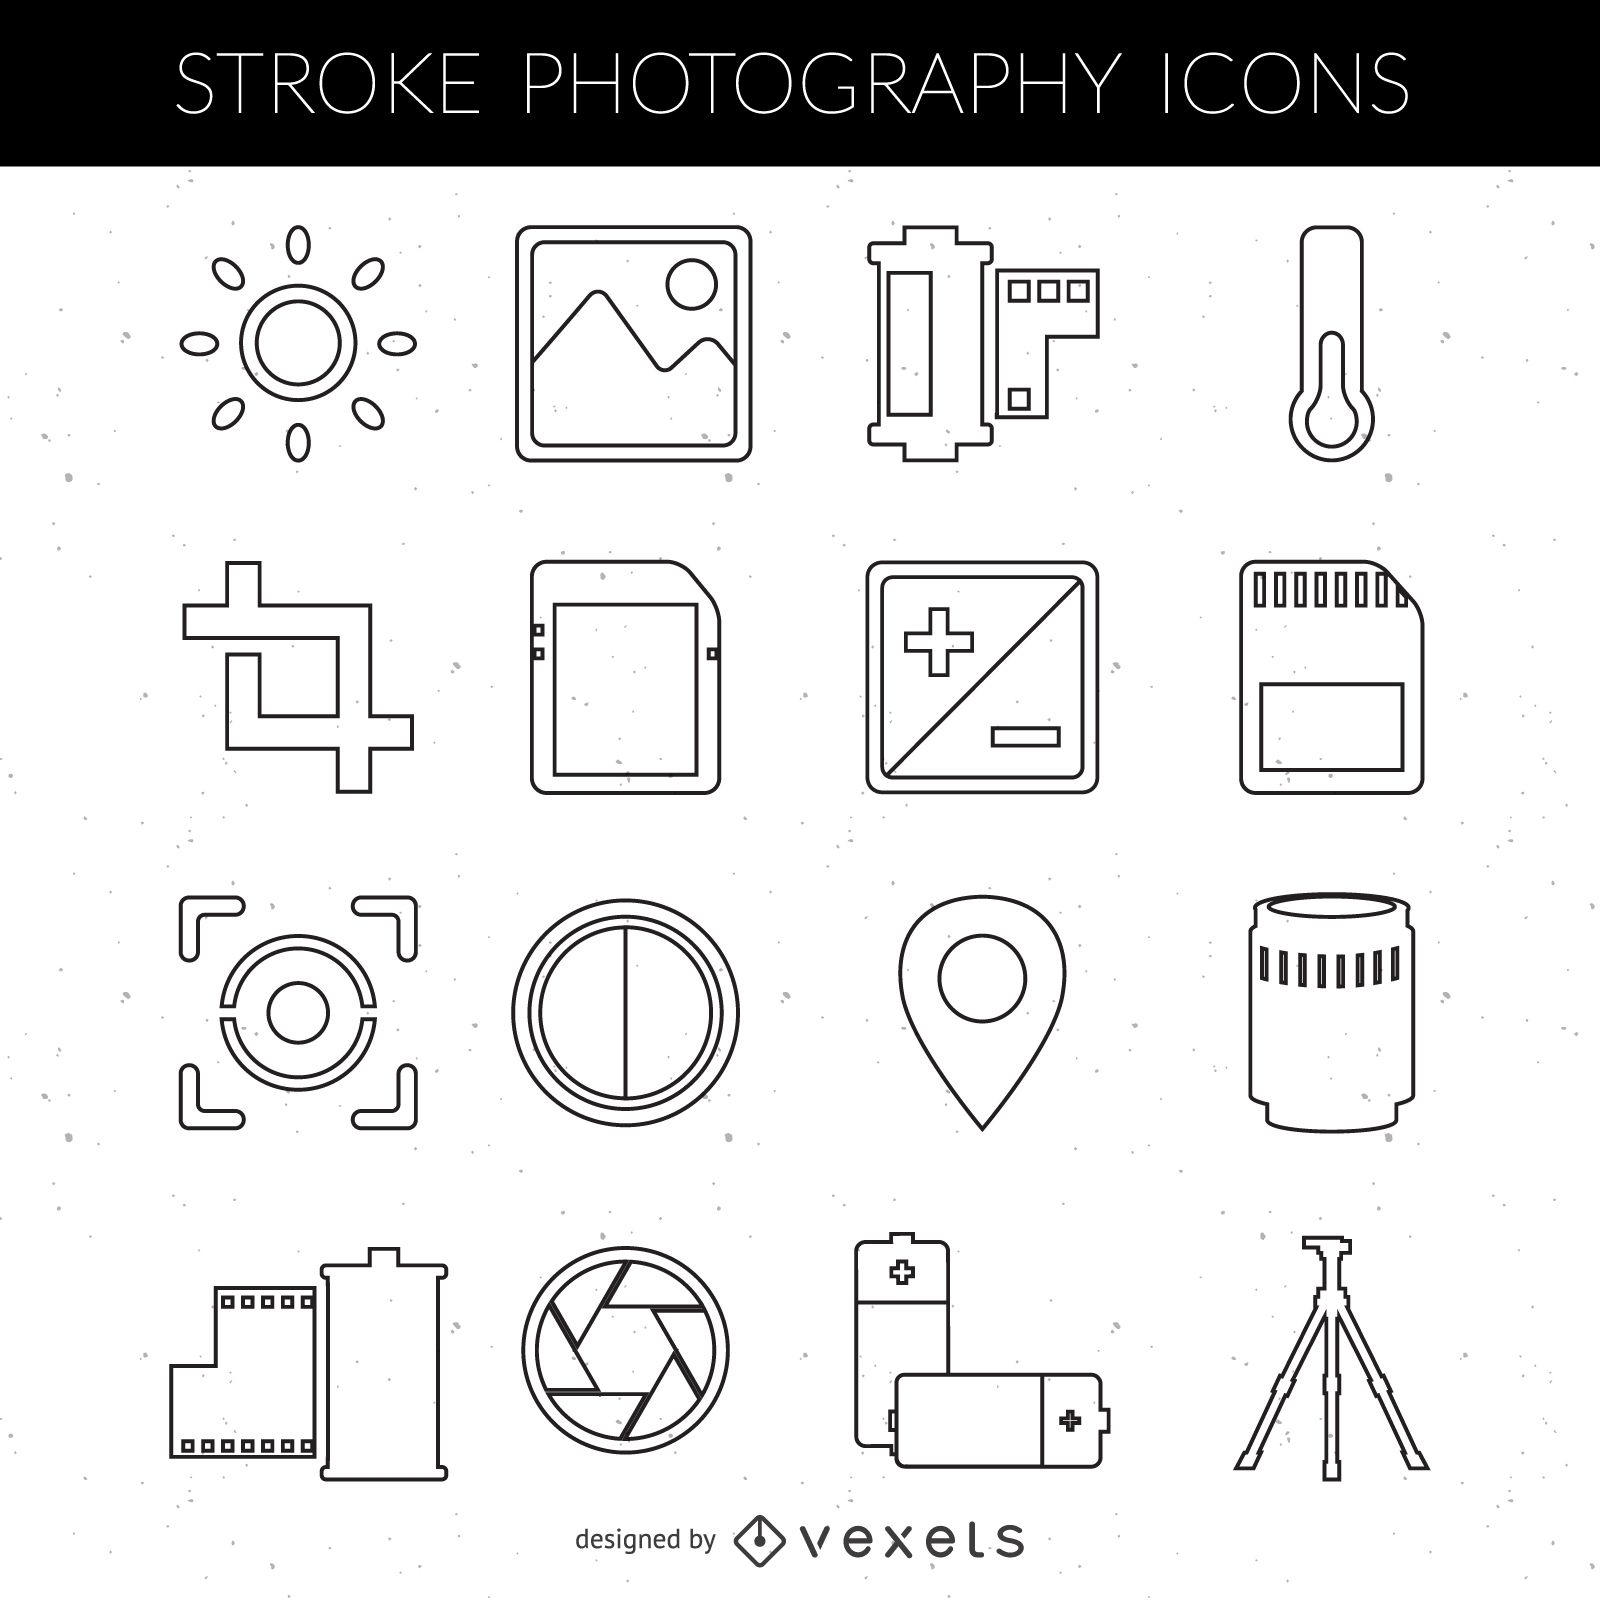 Stroke photography icon collection